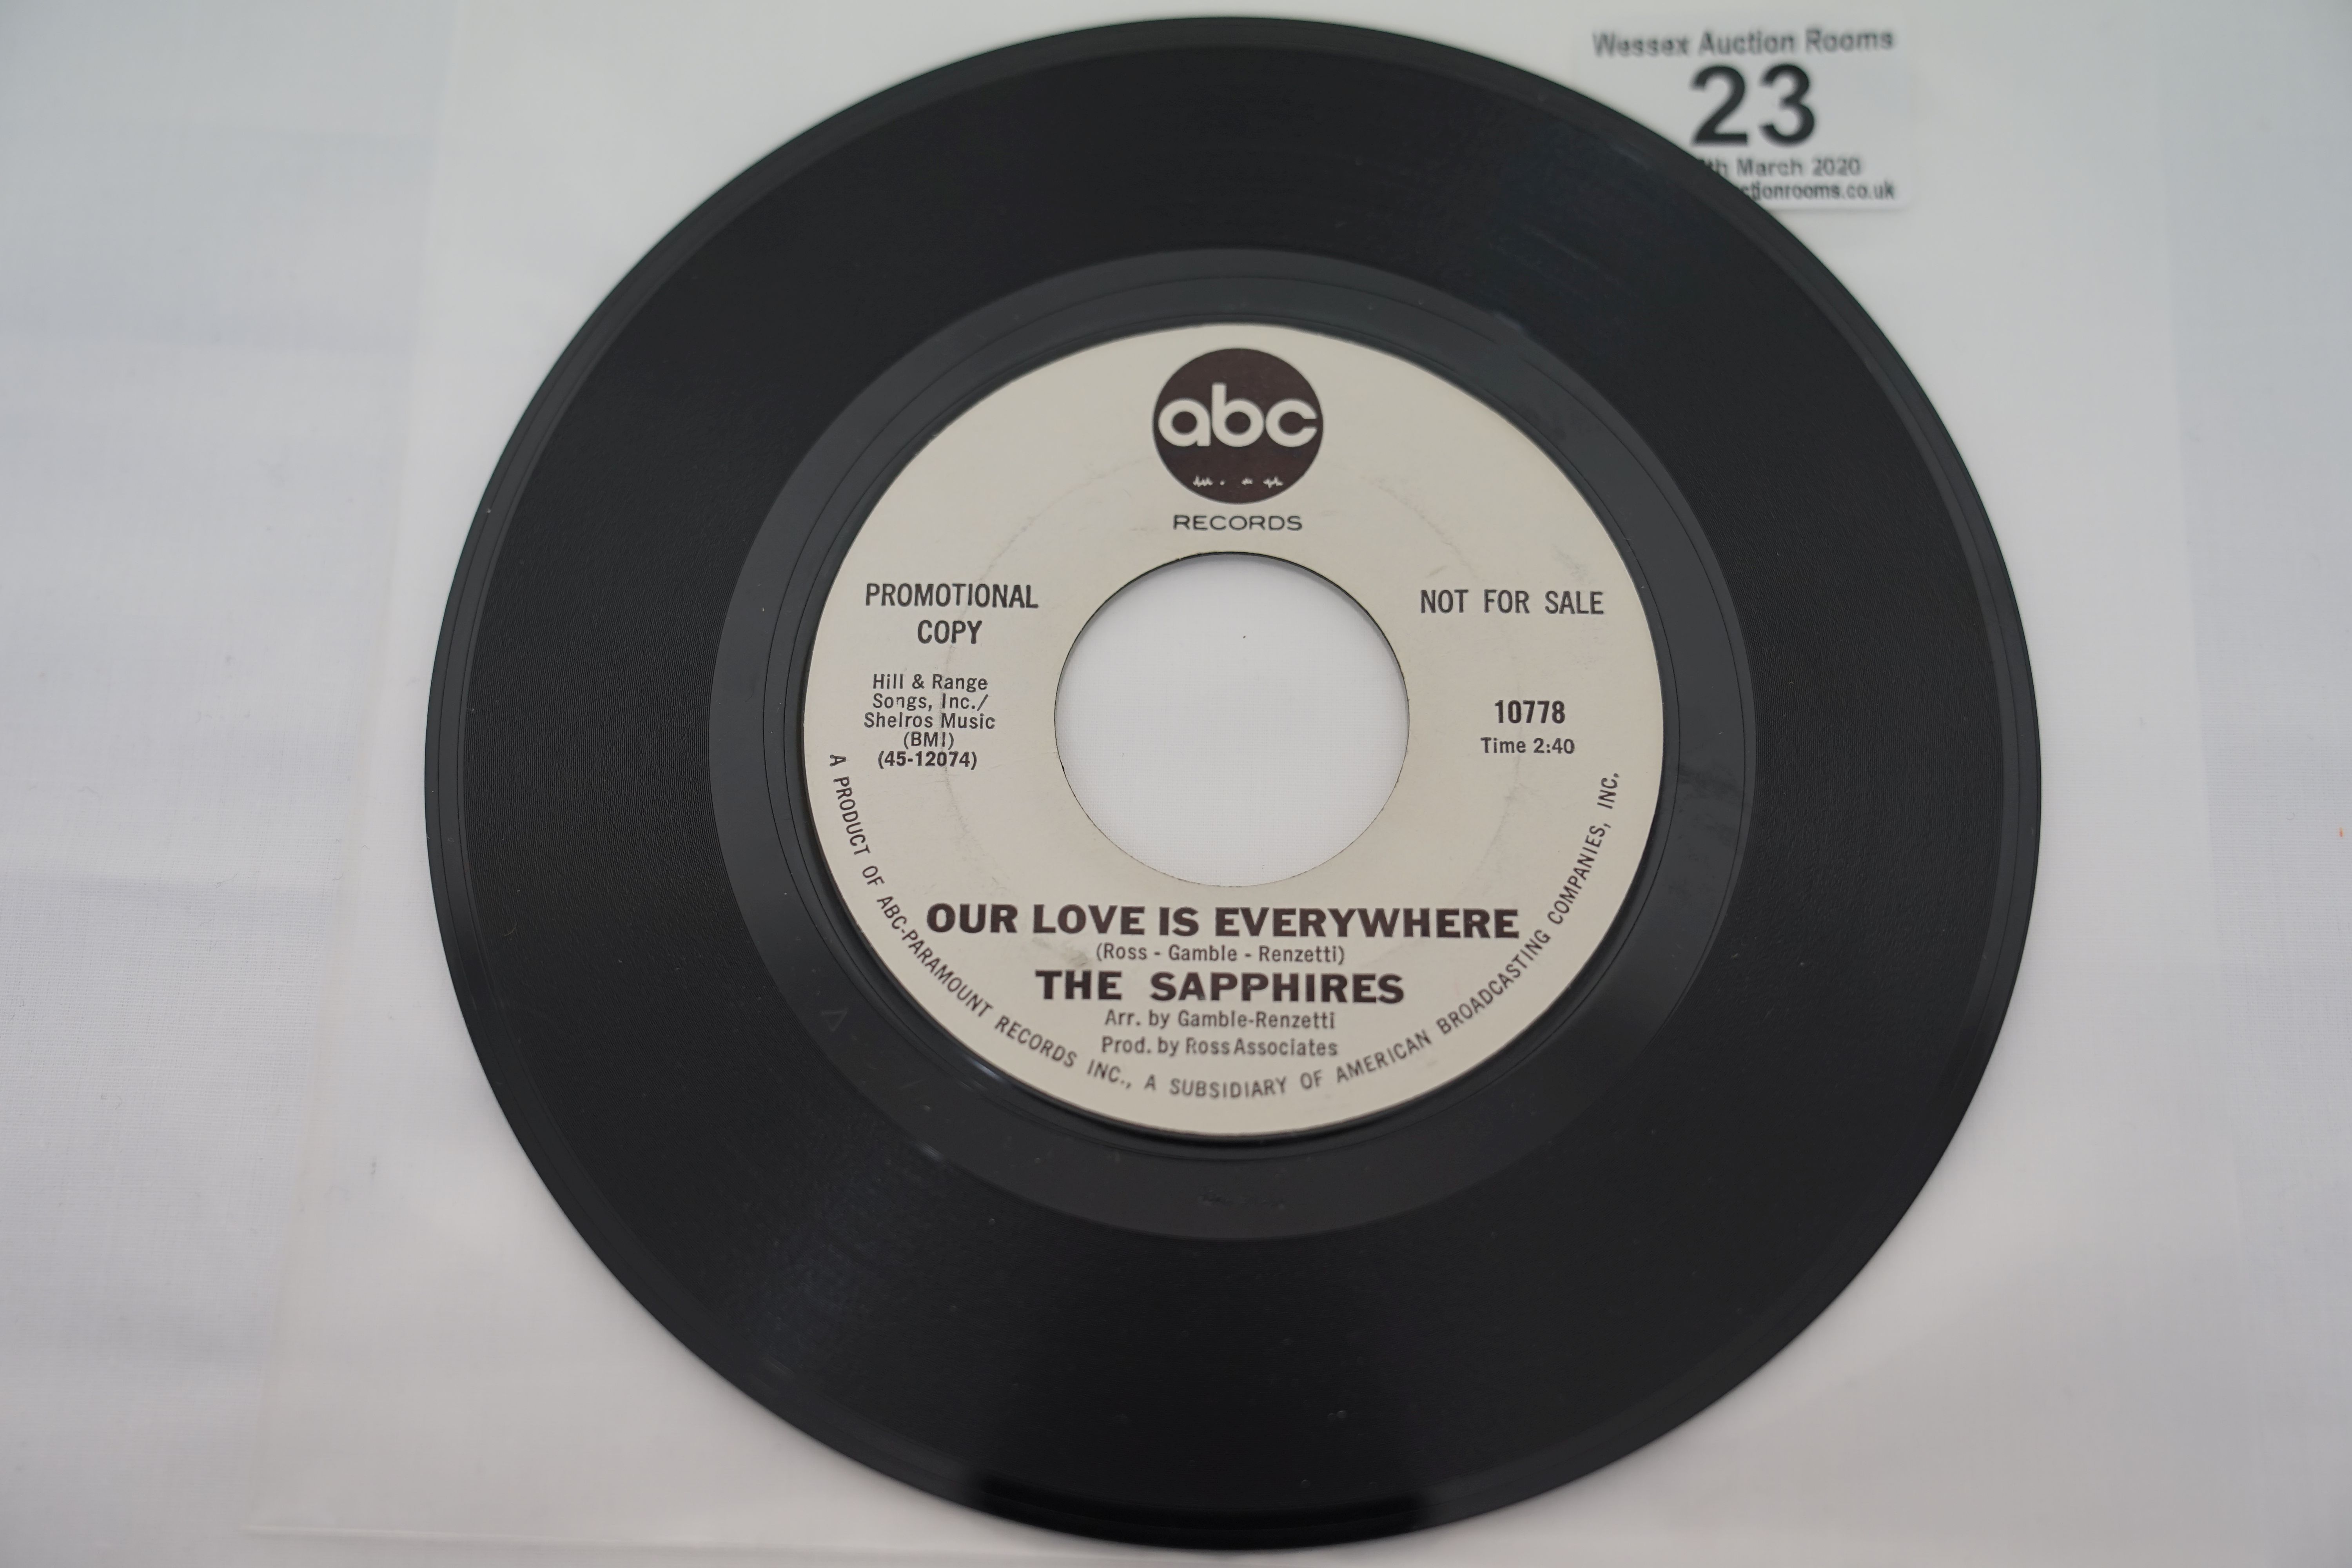 Vinyl - The Sapphires - The Slow Fizz / Our Love Is Everywhere (ABC Records 10778 Promo) NM archive. - Image 4 of 5